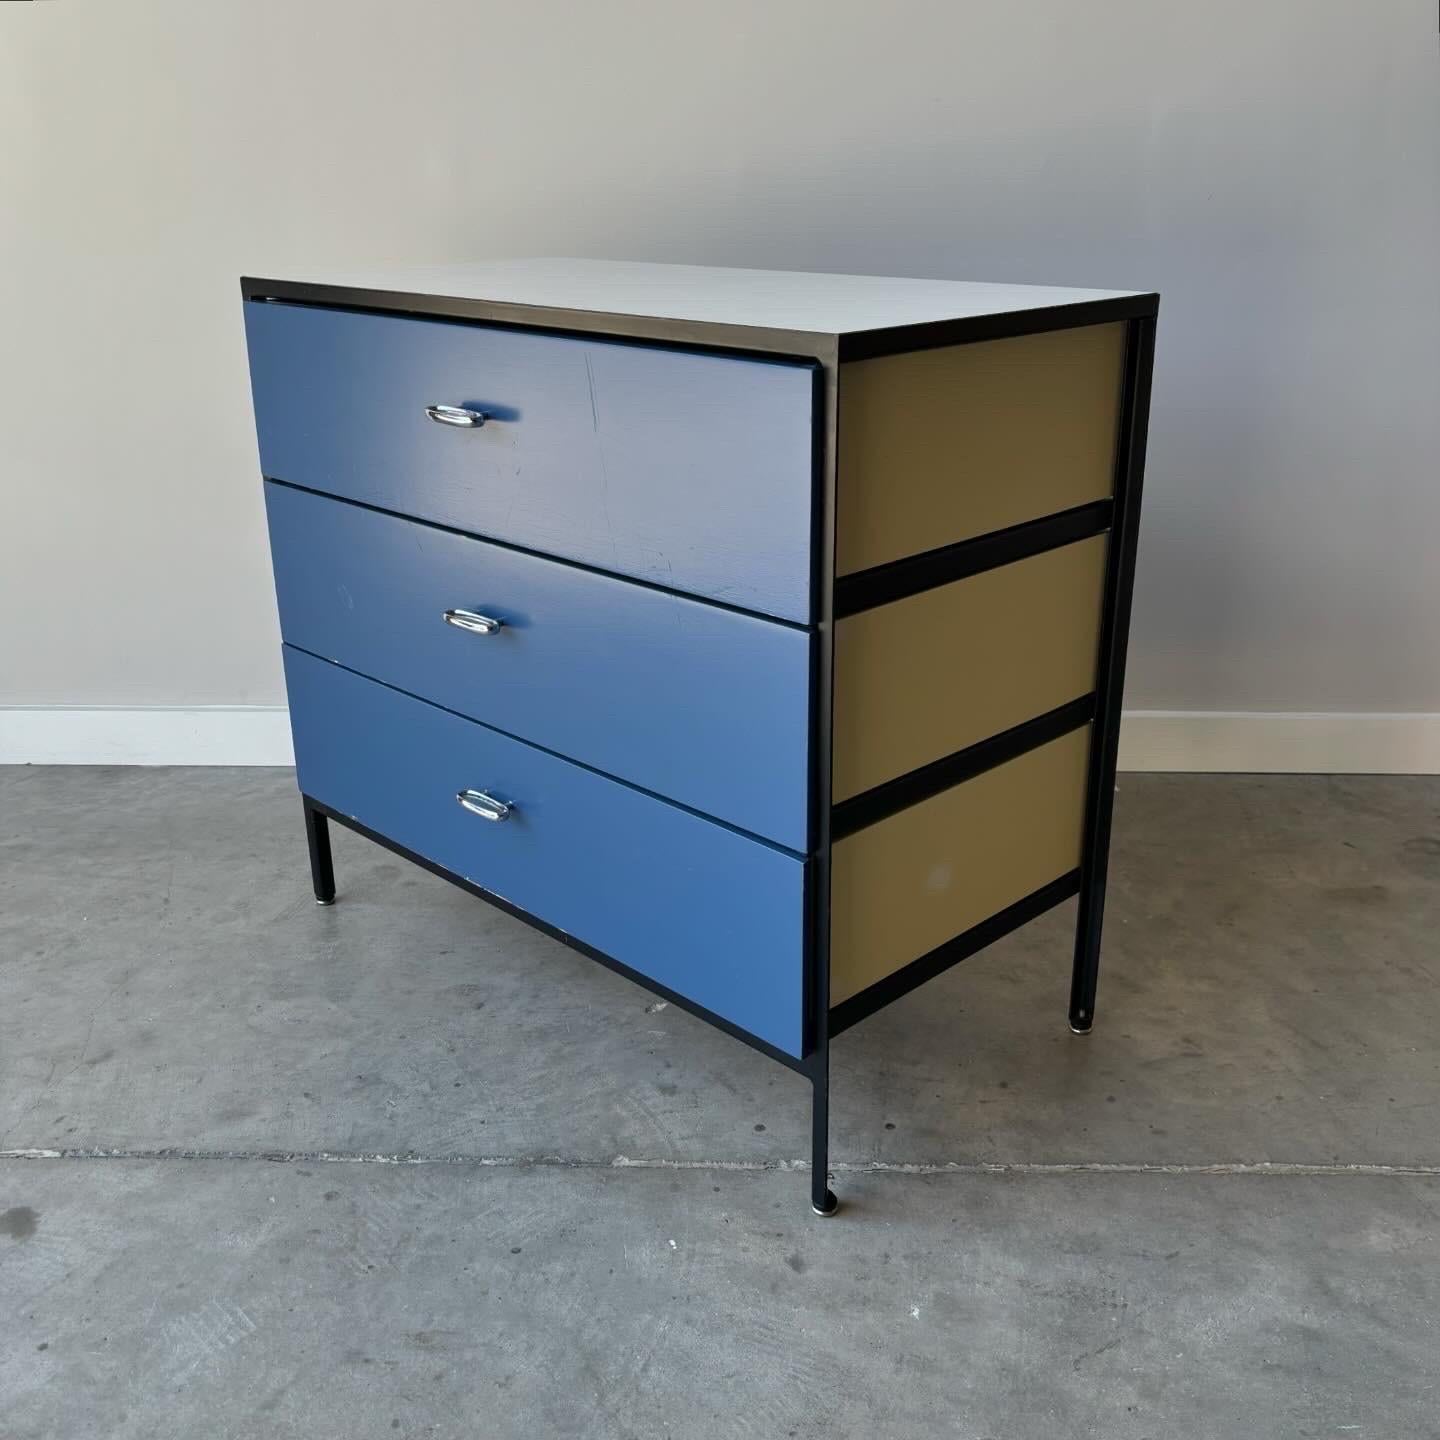 An all original George Nelson small dresser.  In good vintage condition with sign of age and use.   Minor chipping of painted drawer fronts, loss of paint, oxidation to frame.  Herman Miller production dating to the 1950s.
